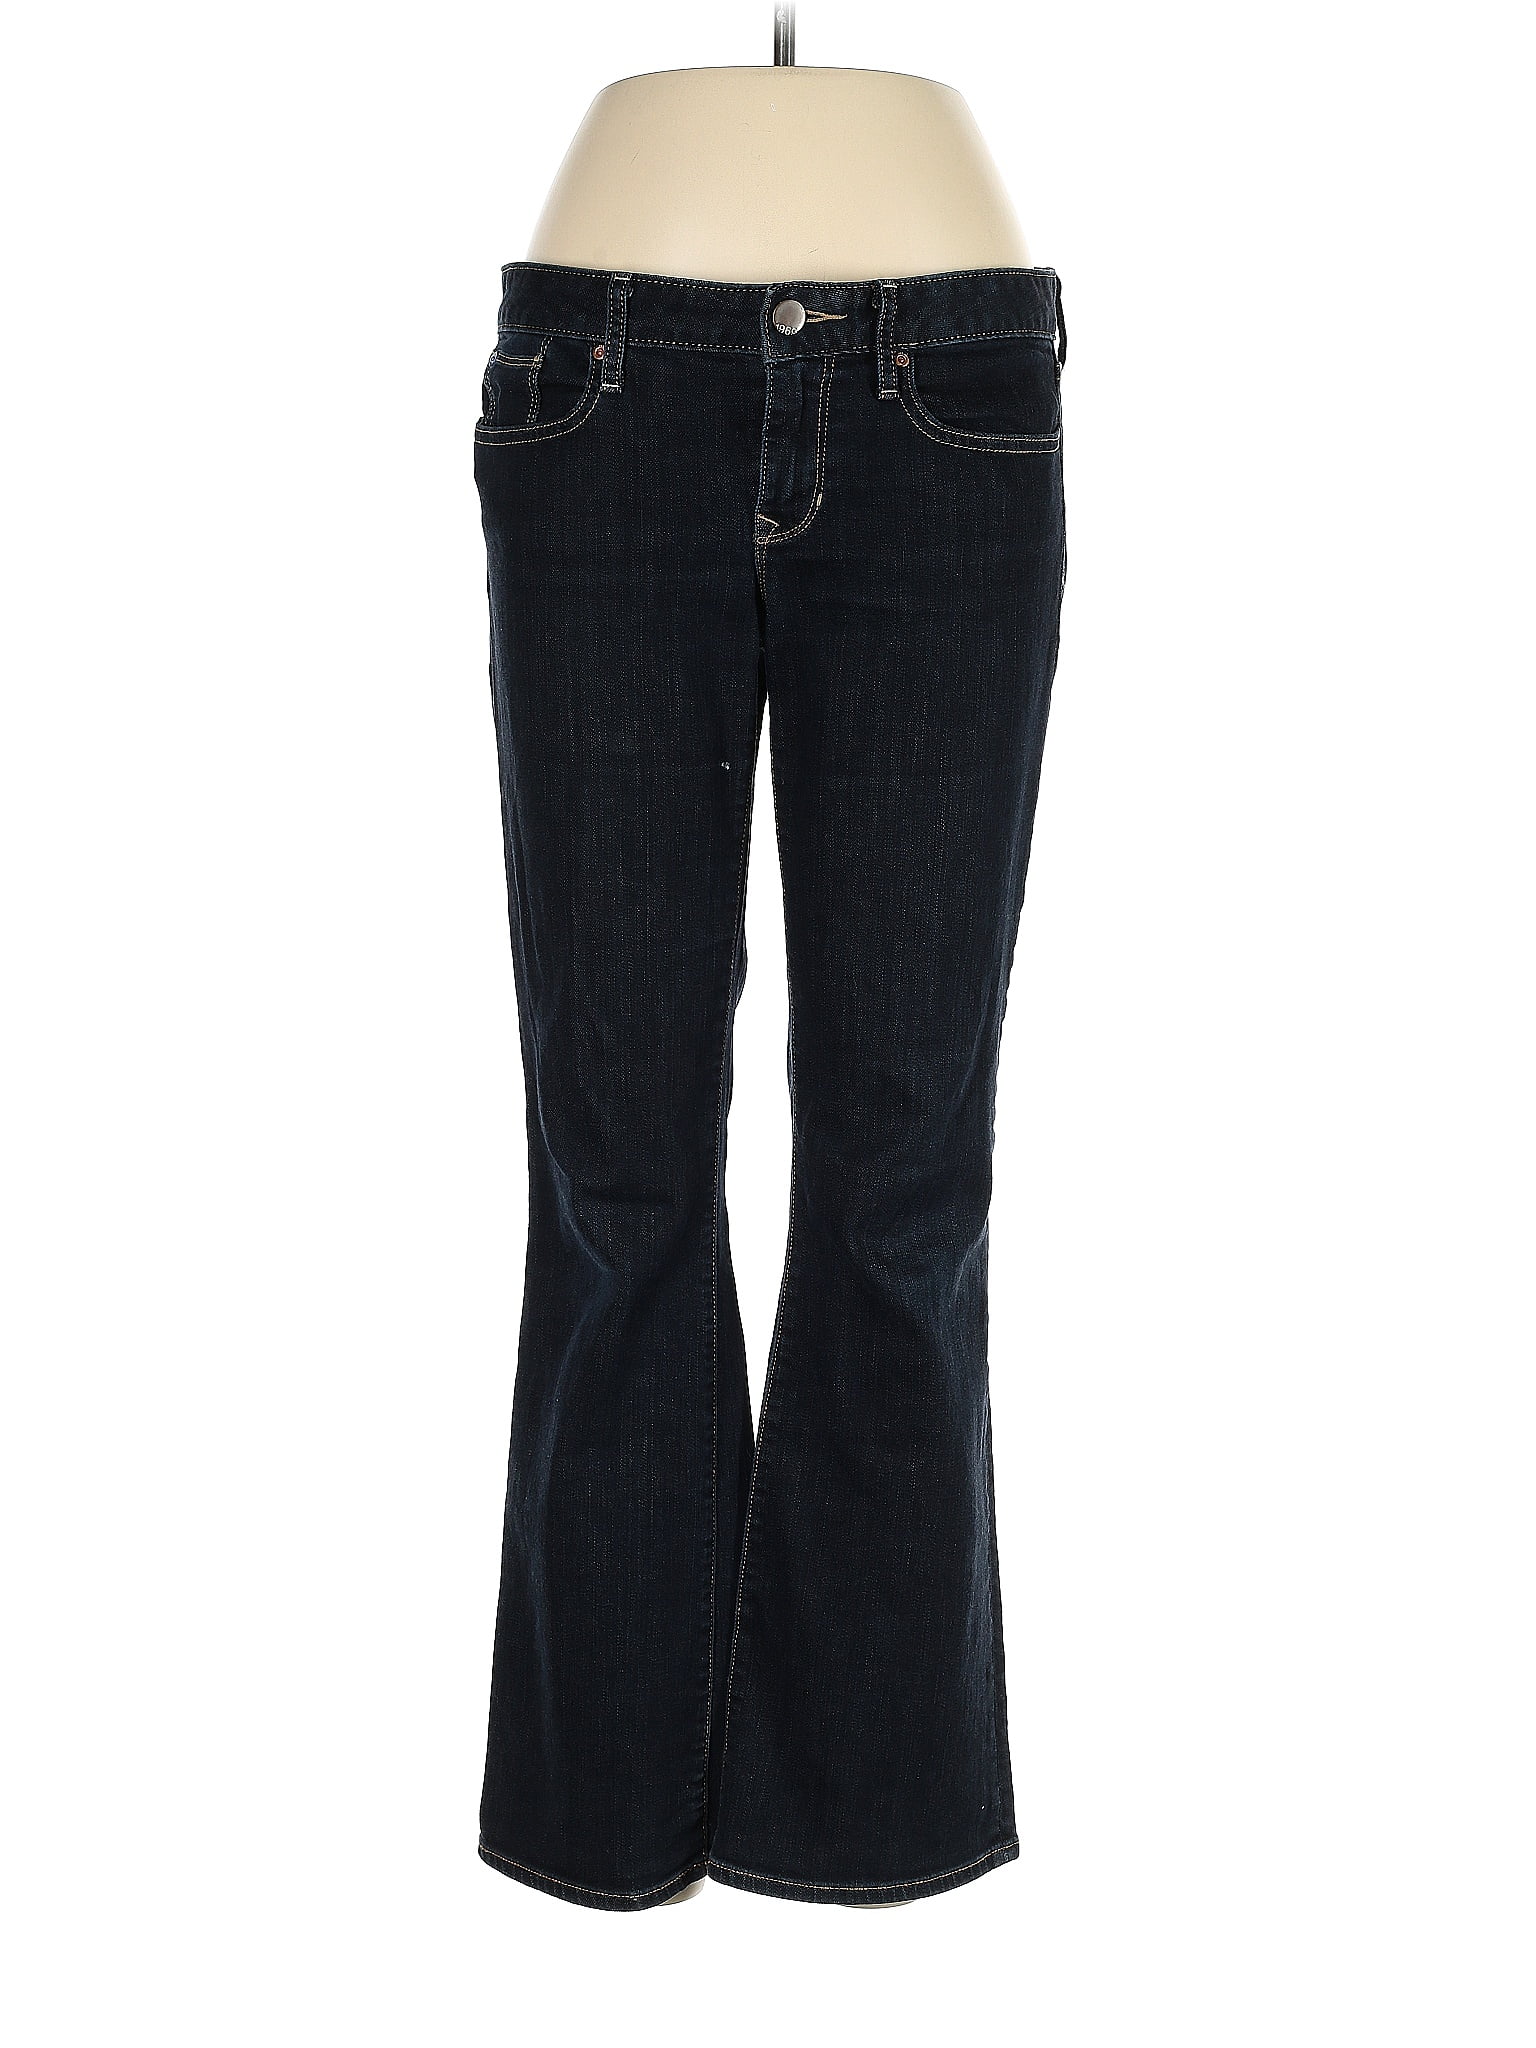 LADIES M&S SIZES 12 14 OR 18 FRESH BLUE PULL ON JEGGINGS JEANS